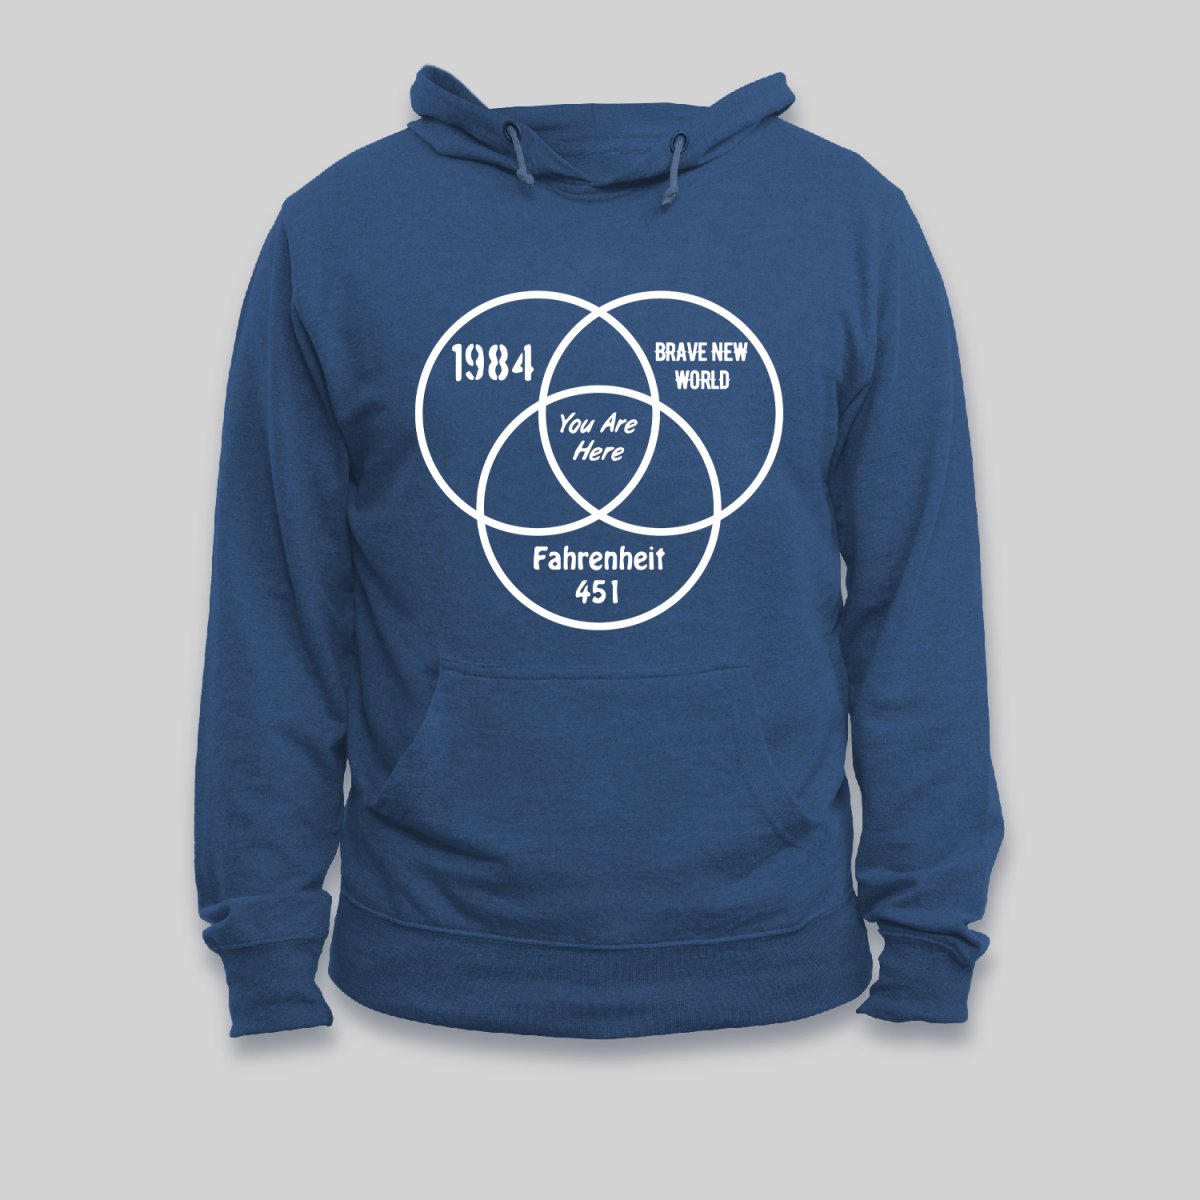 You Are Here Hoodie - Geeksoutfit